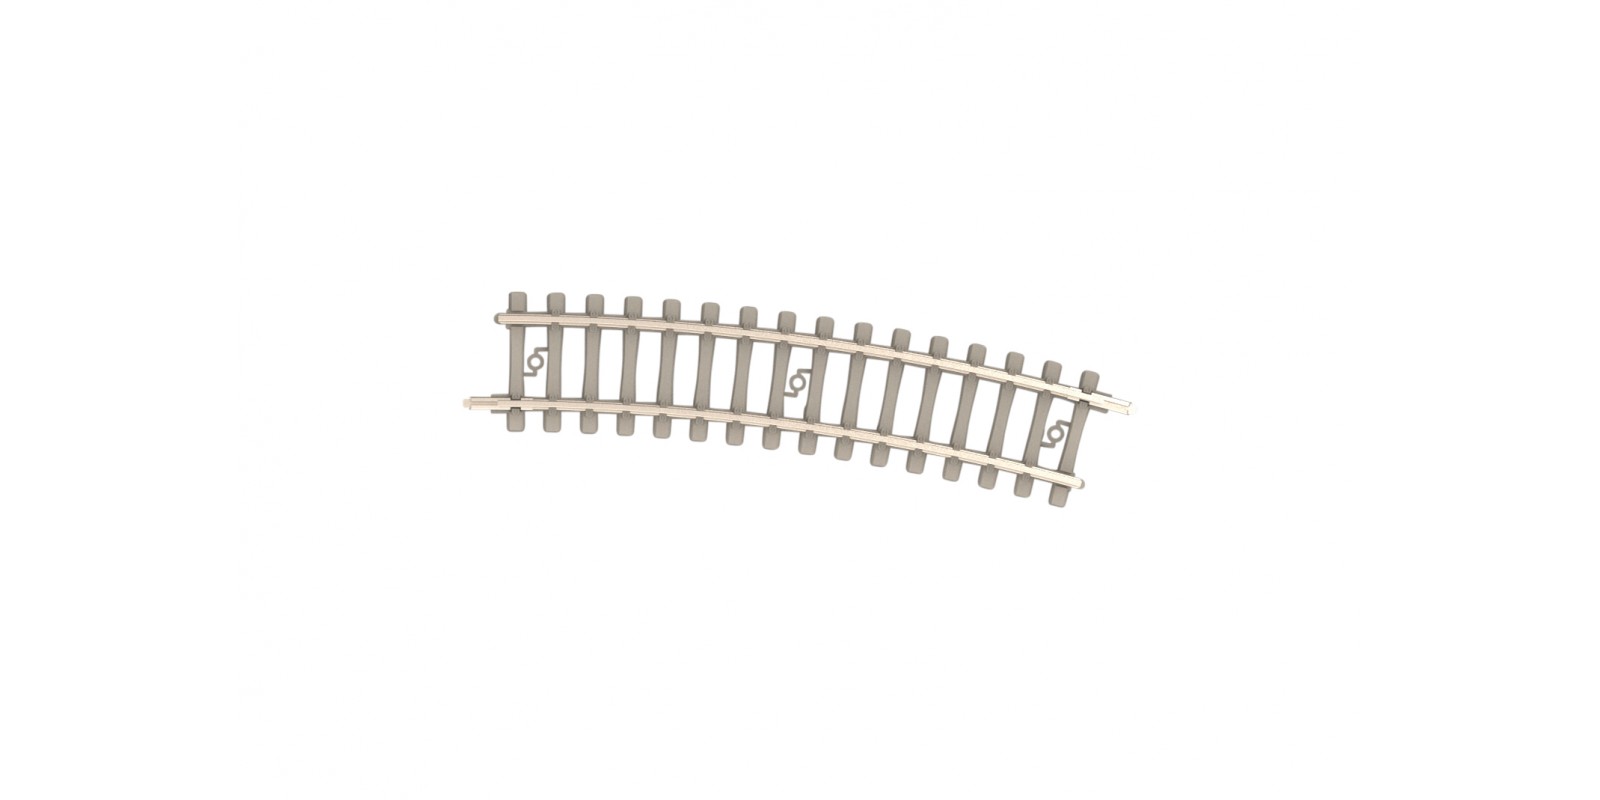 T14511 Curved Track with Concrete Ties